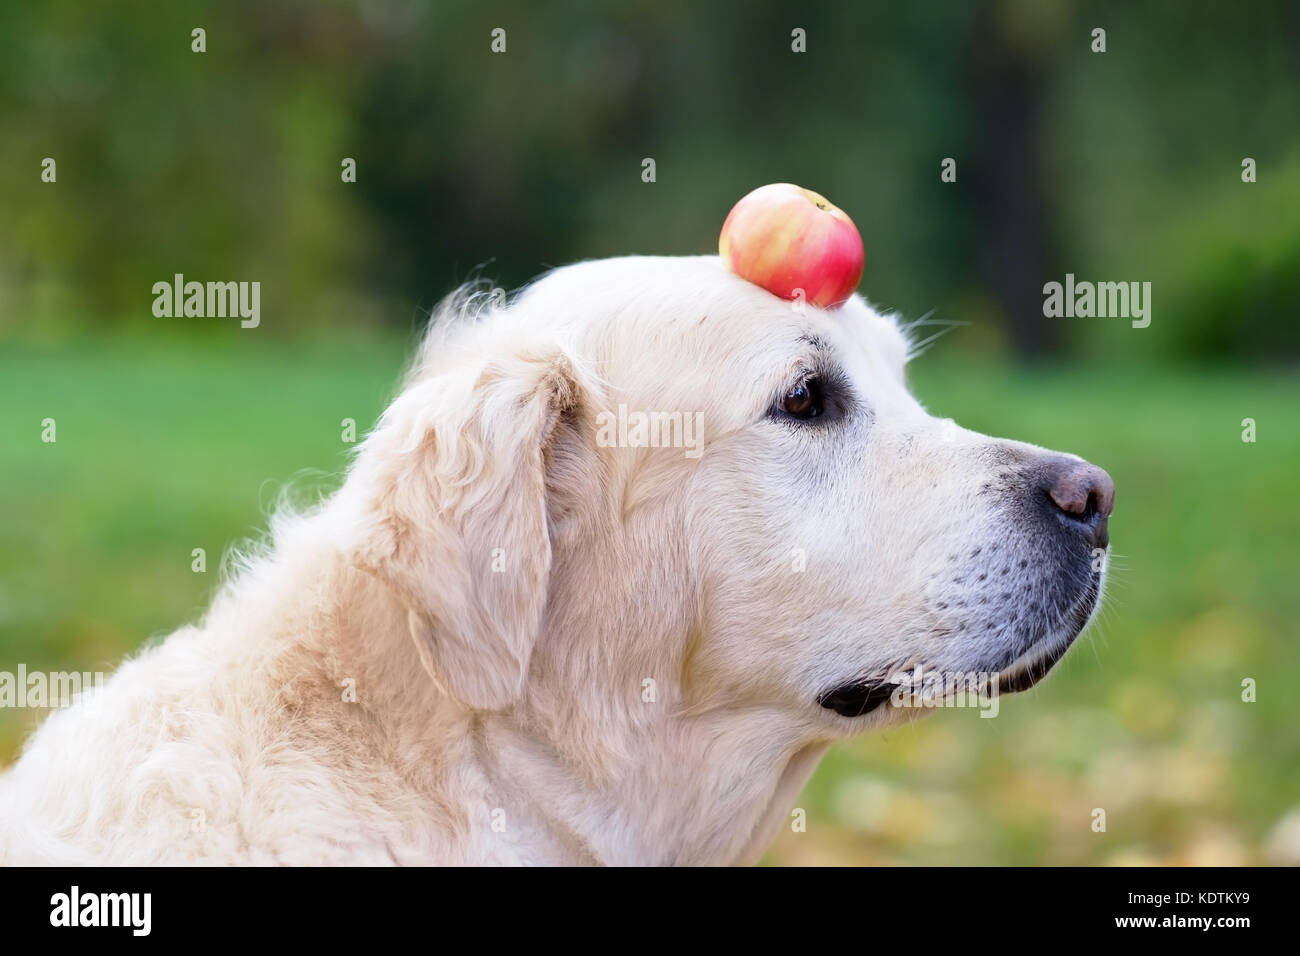 A golden retriever is holding an apple on his nose. Stock Photo